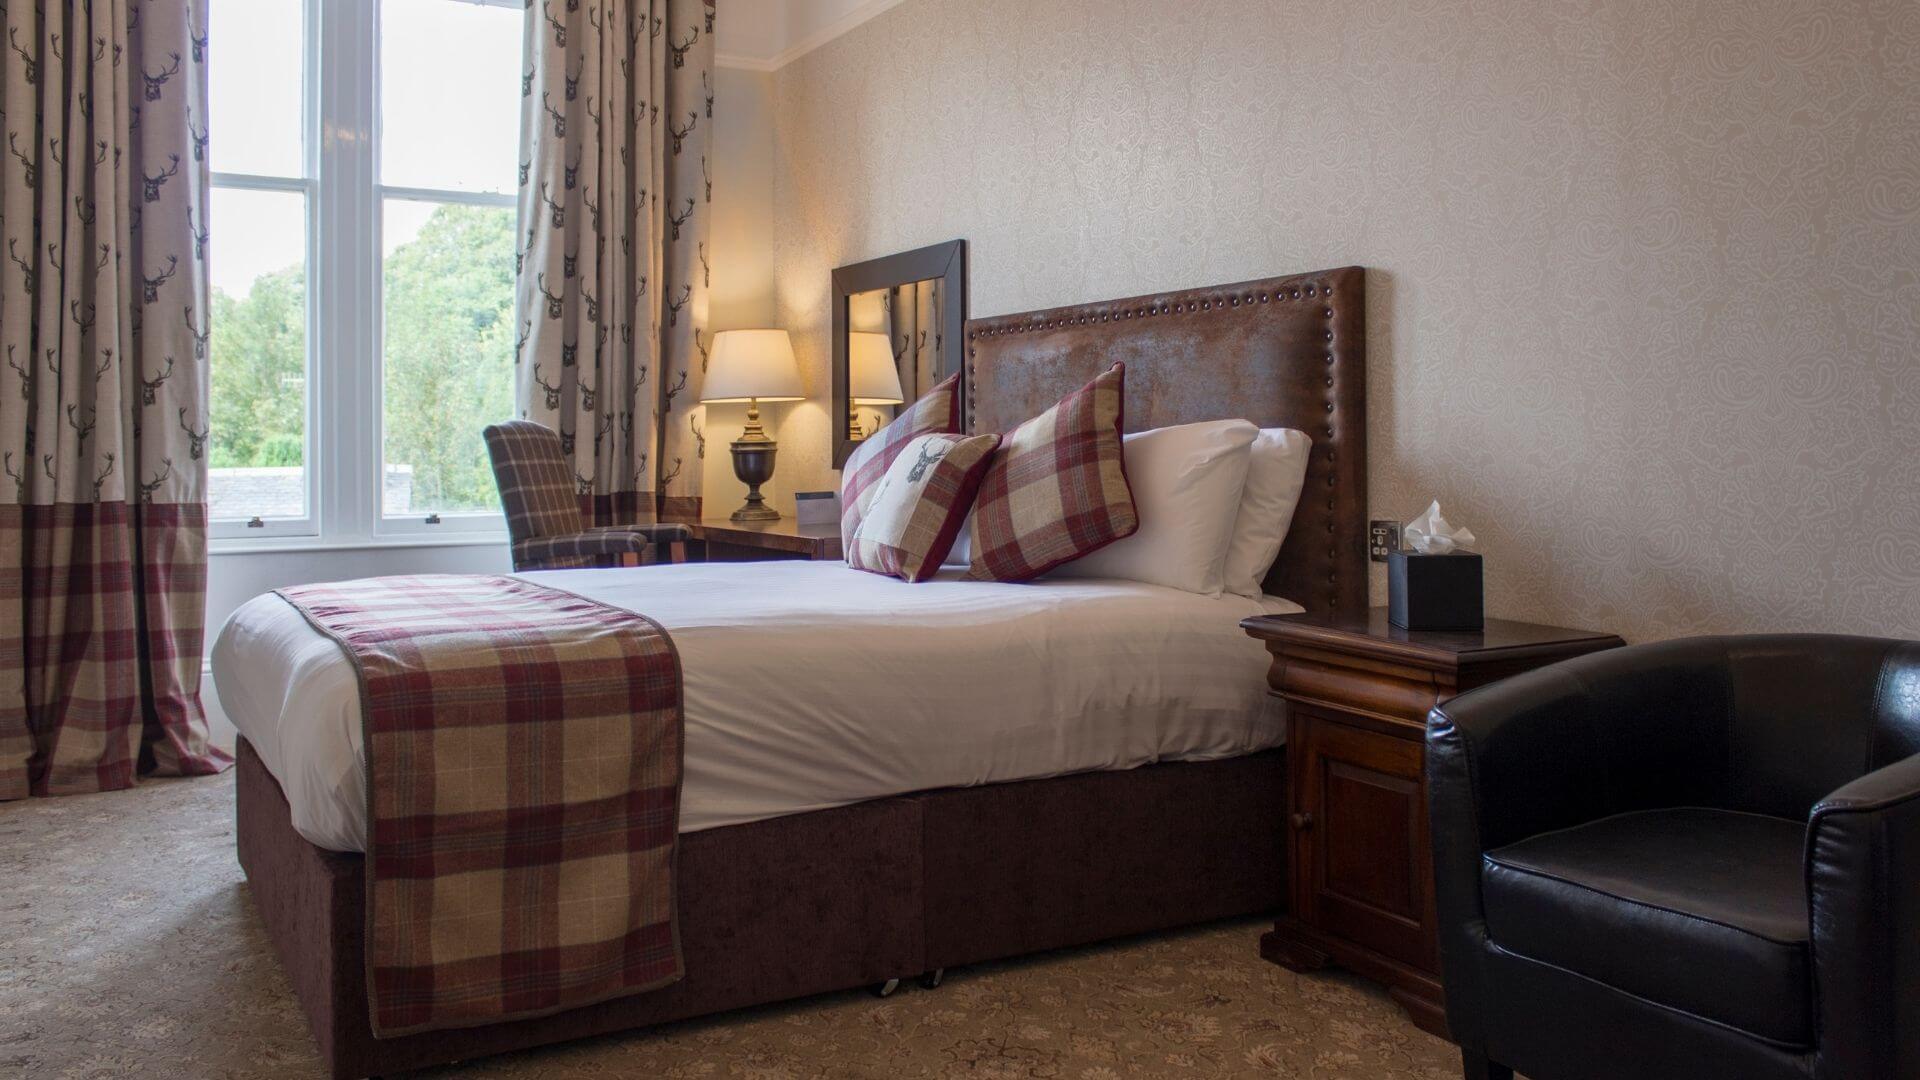 Rooms Gallery | Hotel Rooms in Pitlochry | Scotland's Spa Hotel